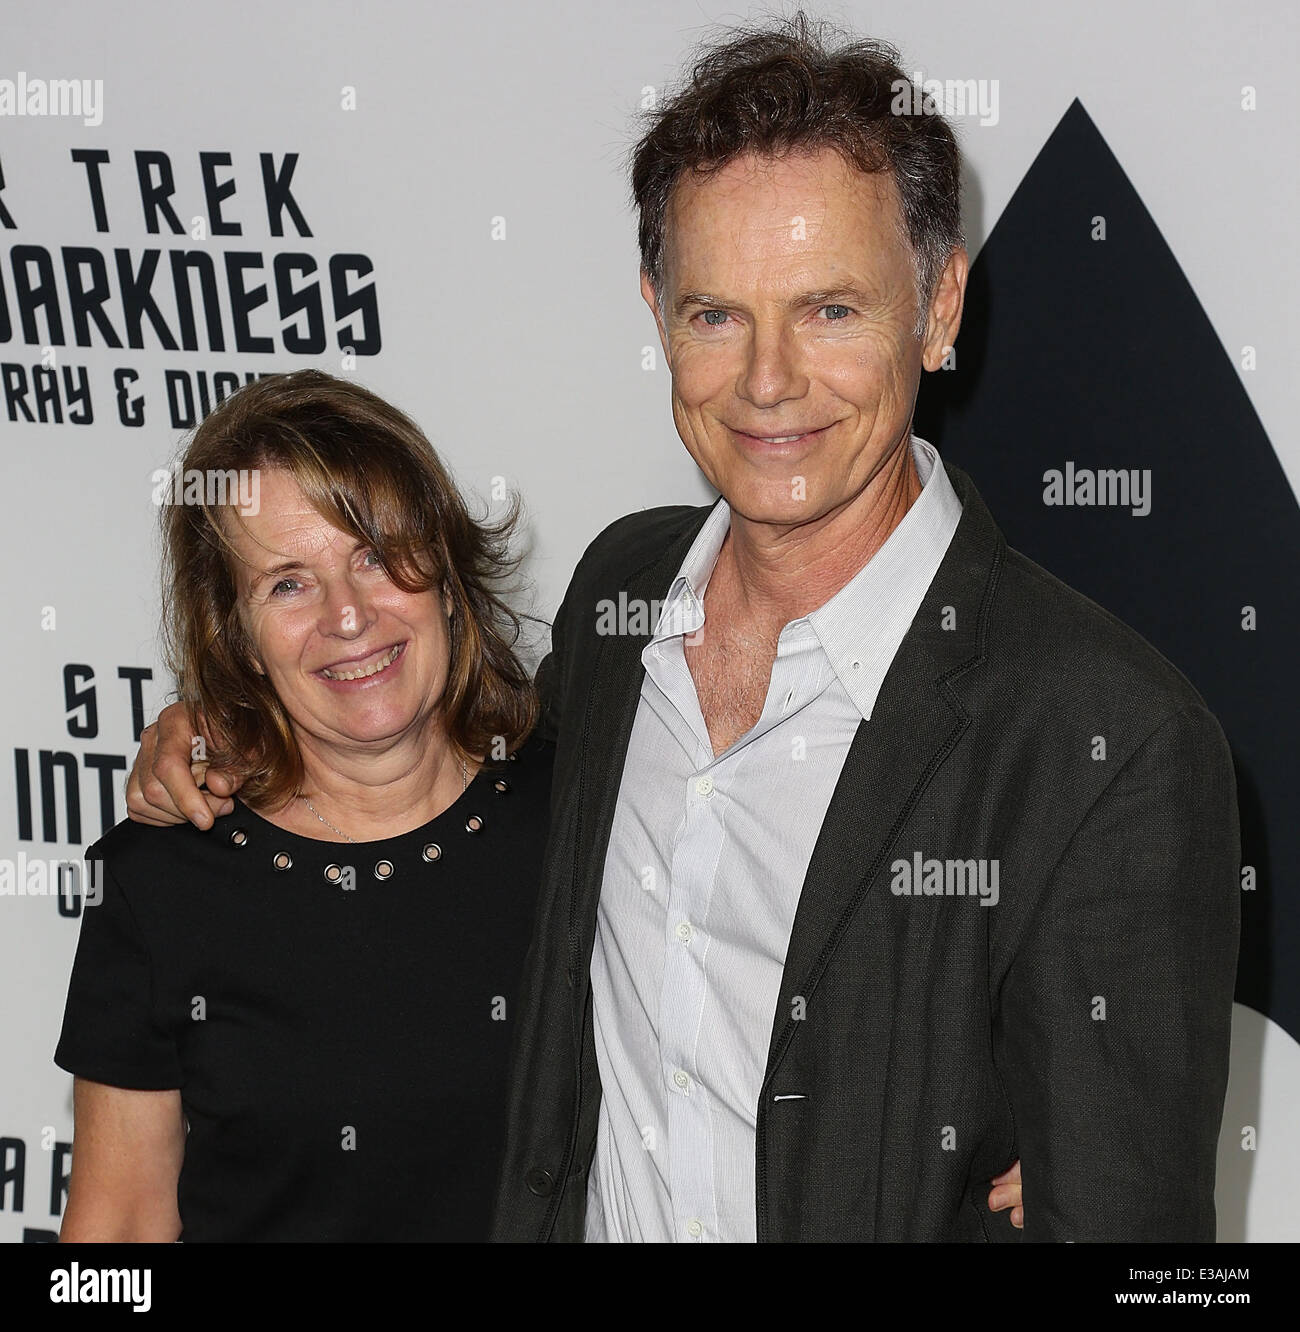 Celebrities attend STAR TREK INTO DARKNESS Blu-ray and DVD debut at California Science Center.  Featuring: Susan Devlin,Bruce Greenwood Where: Los Angeles, CA, United States When: 11 Sep 2013 Stock Photo